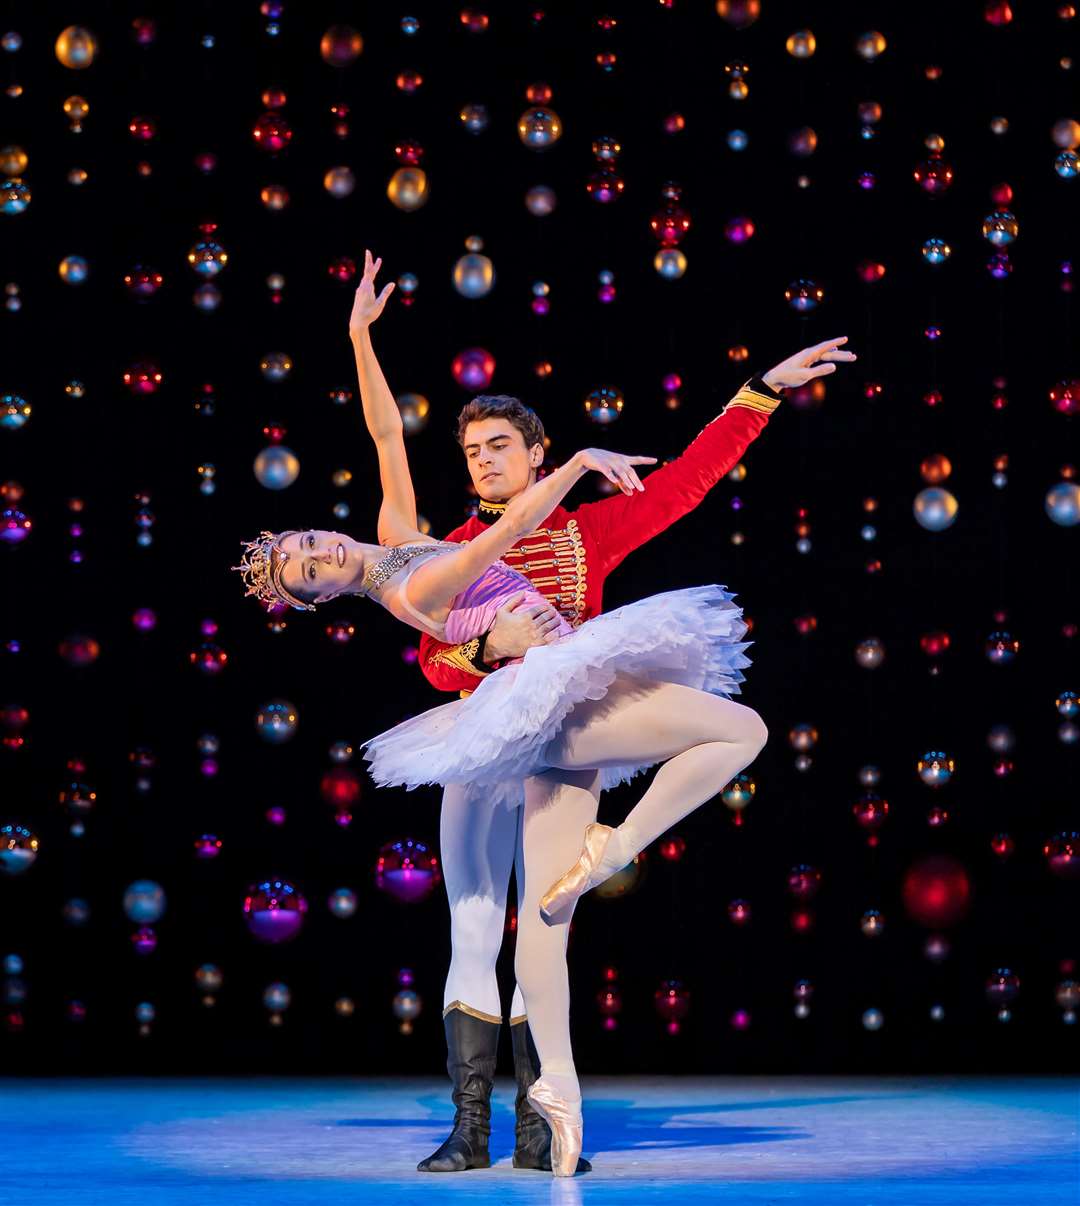 Marge Hendrick and Evan Loudon as Sugar Plum Fairy and Nutcracker prince. Pictures: Andy Ross